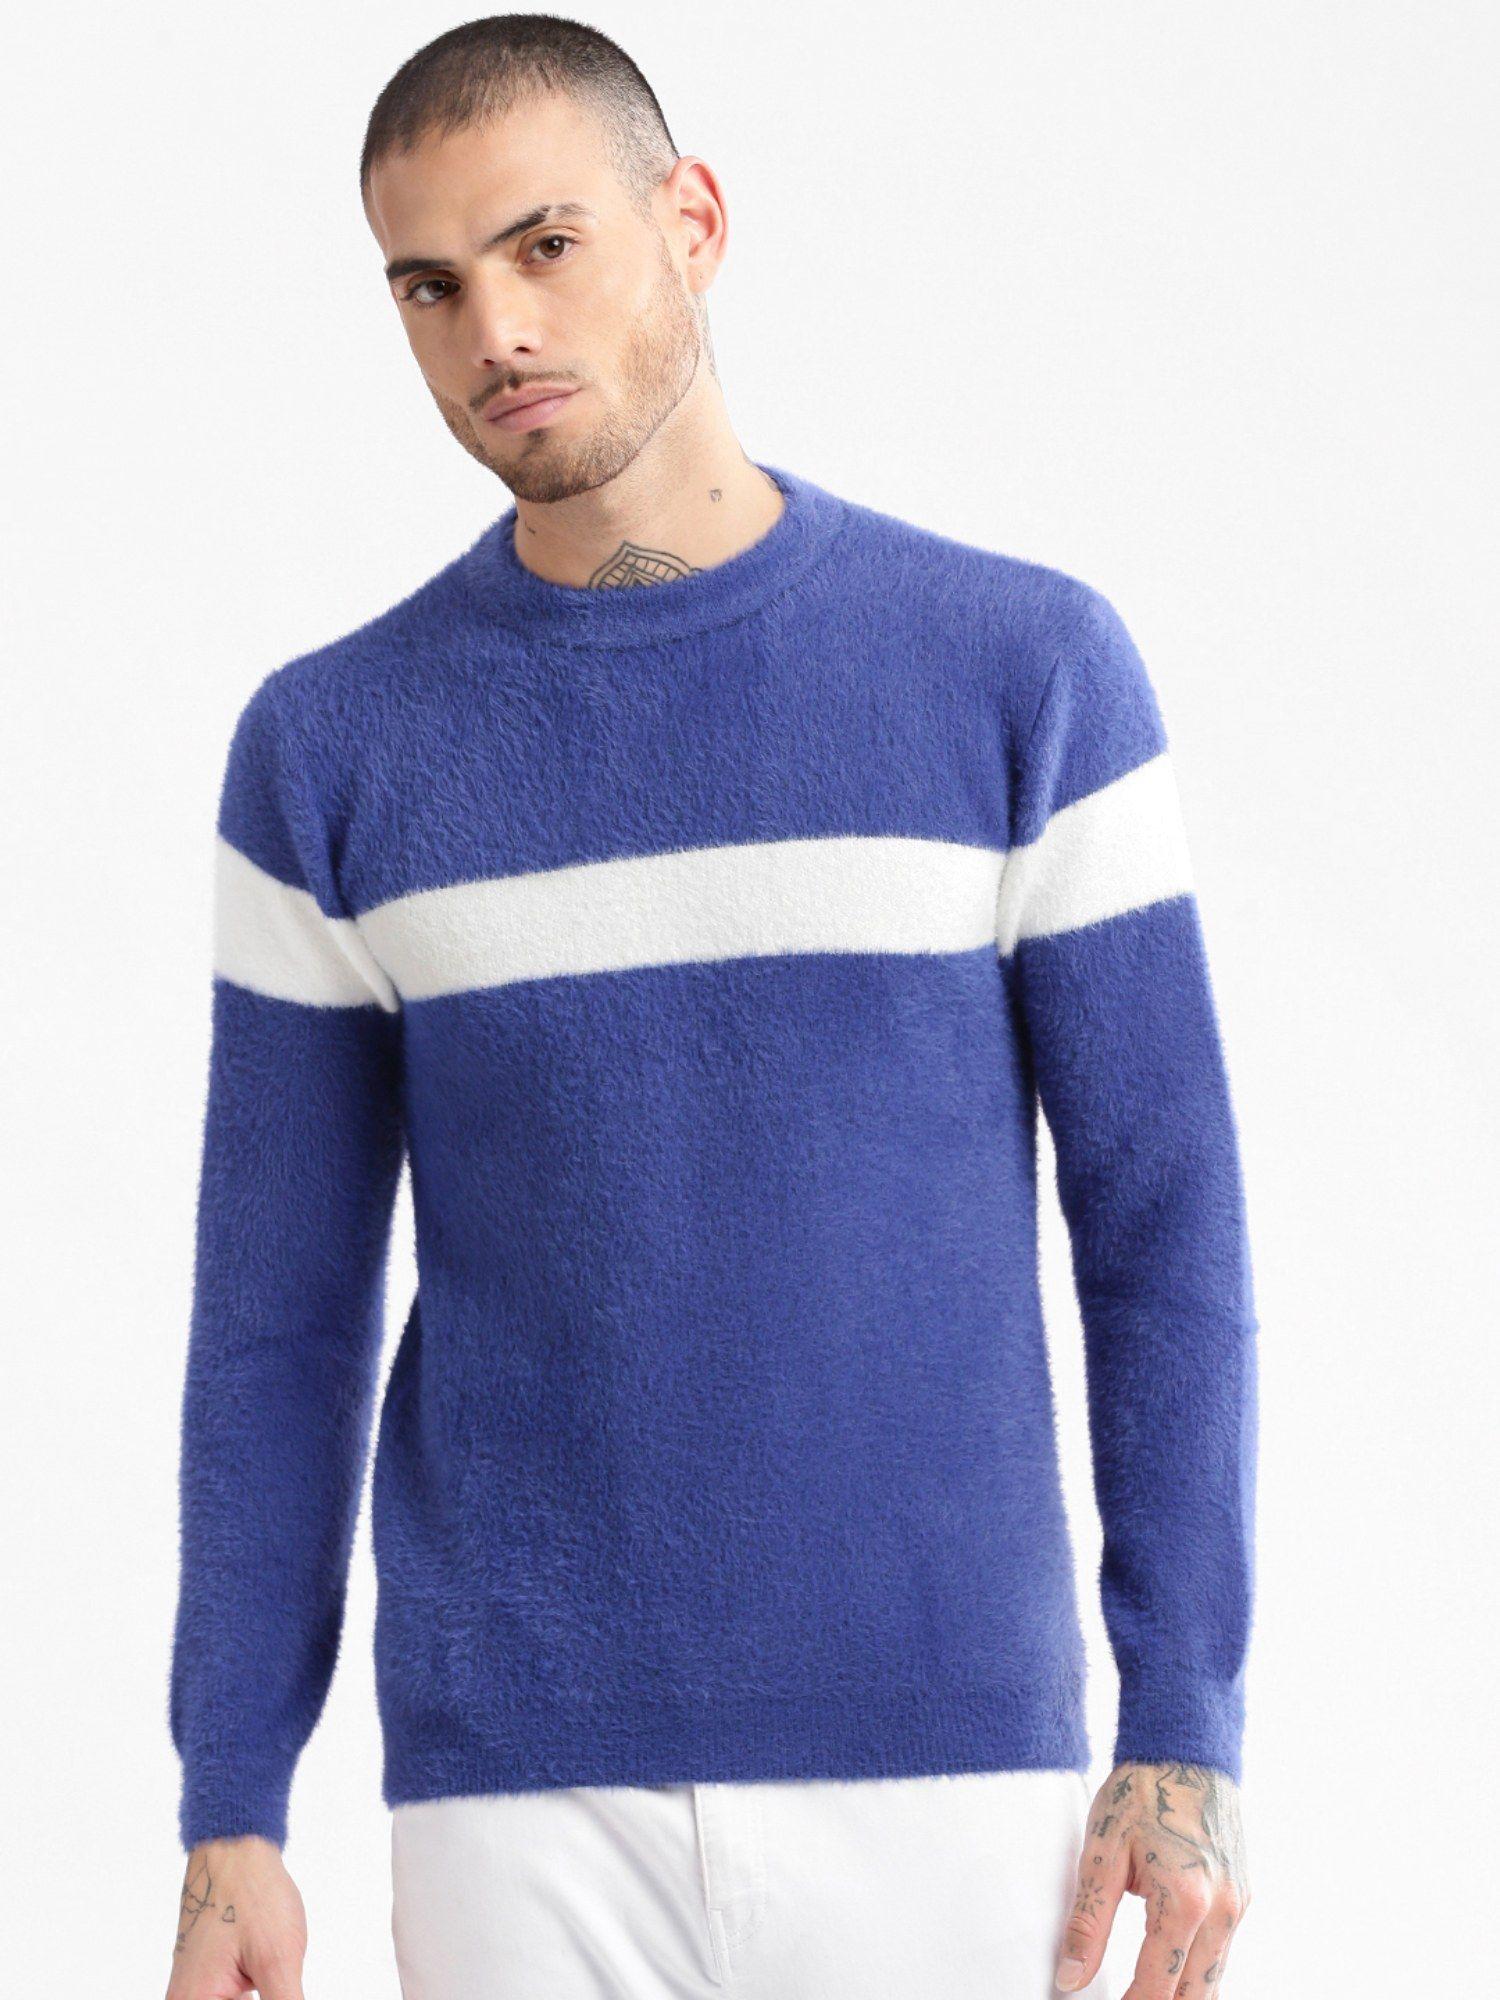 mens-round-neck-long-sleeves-stripes-blue-pullover